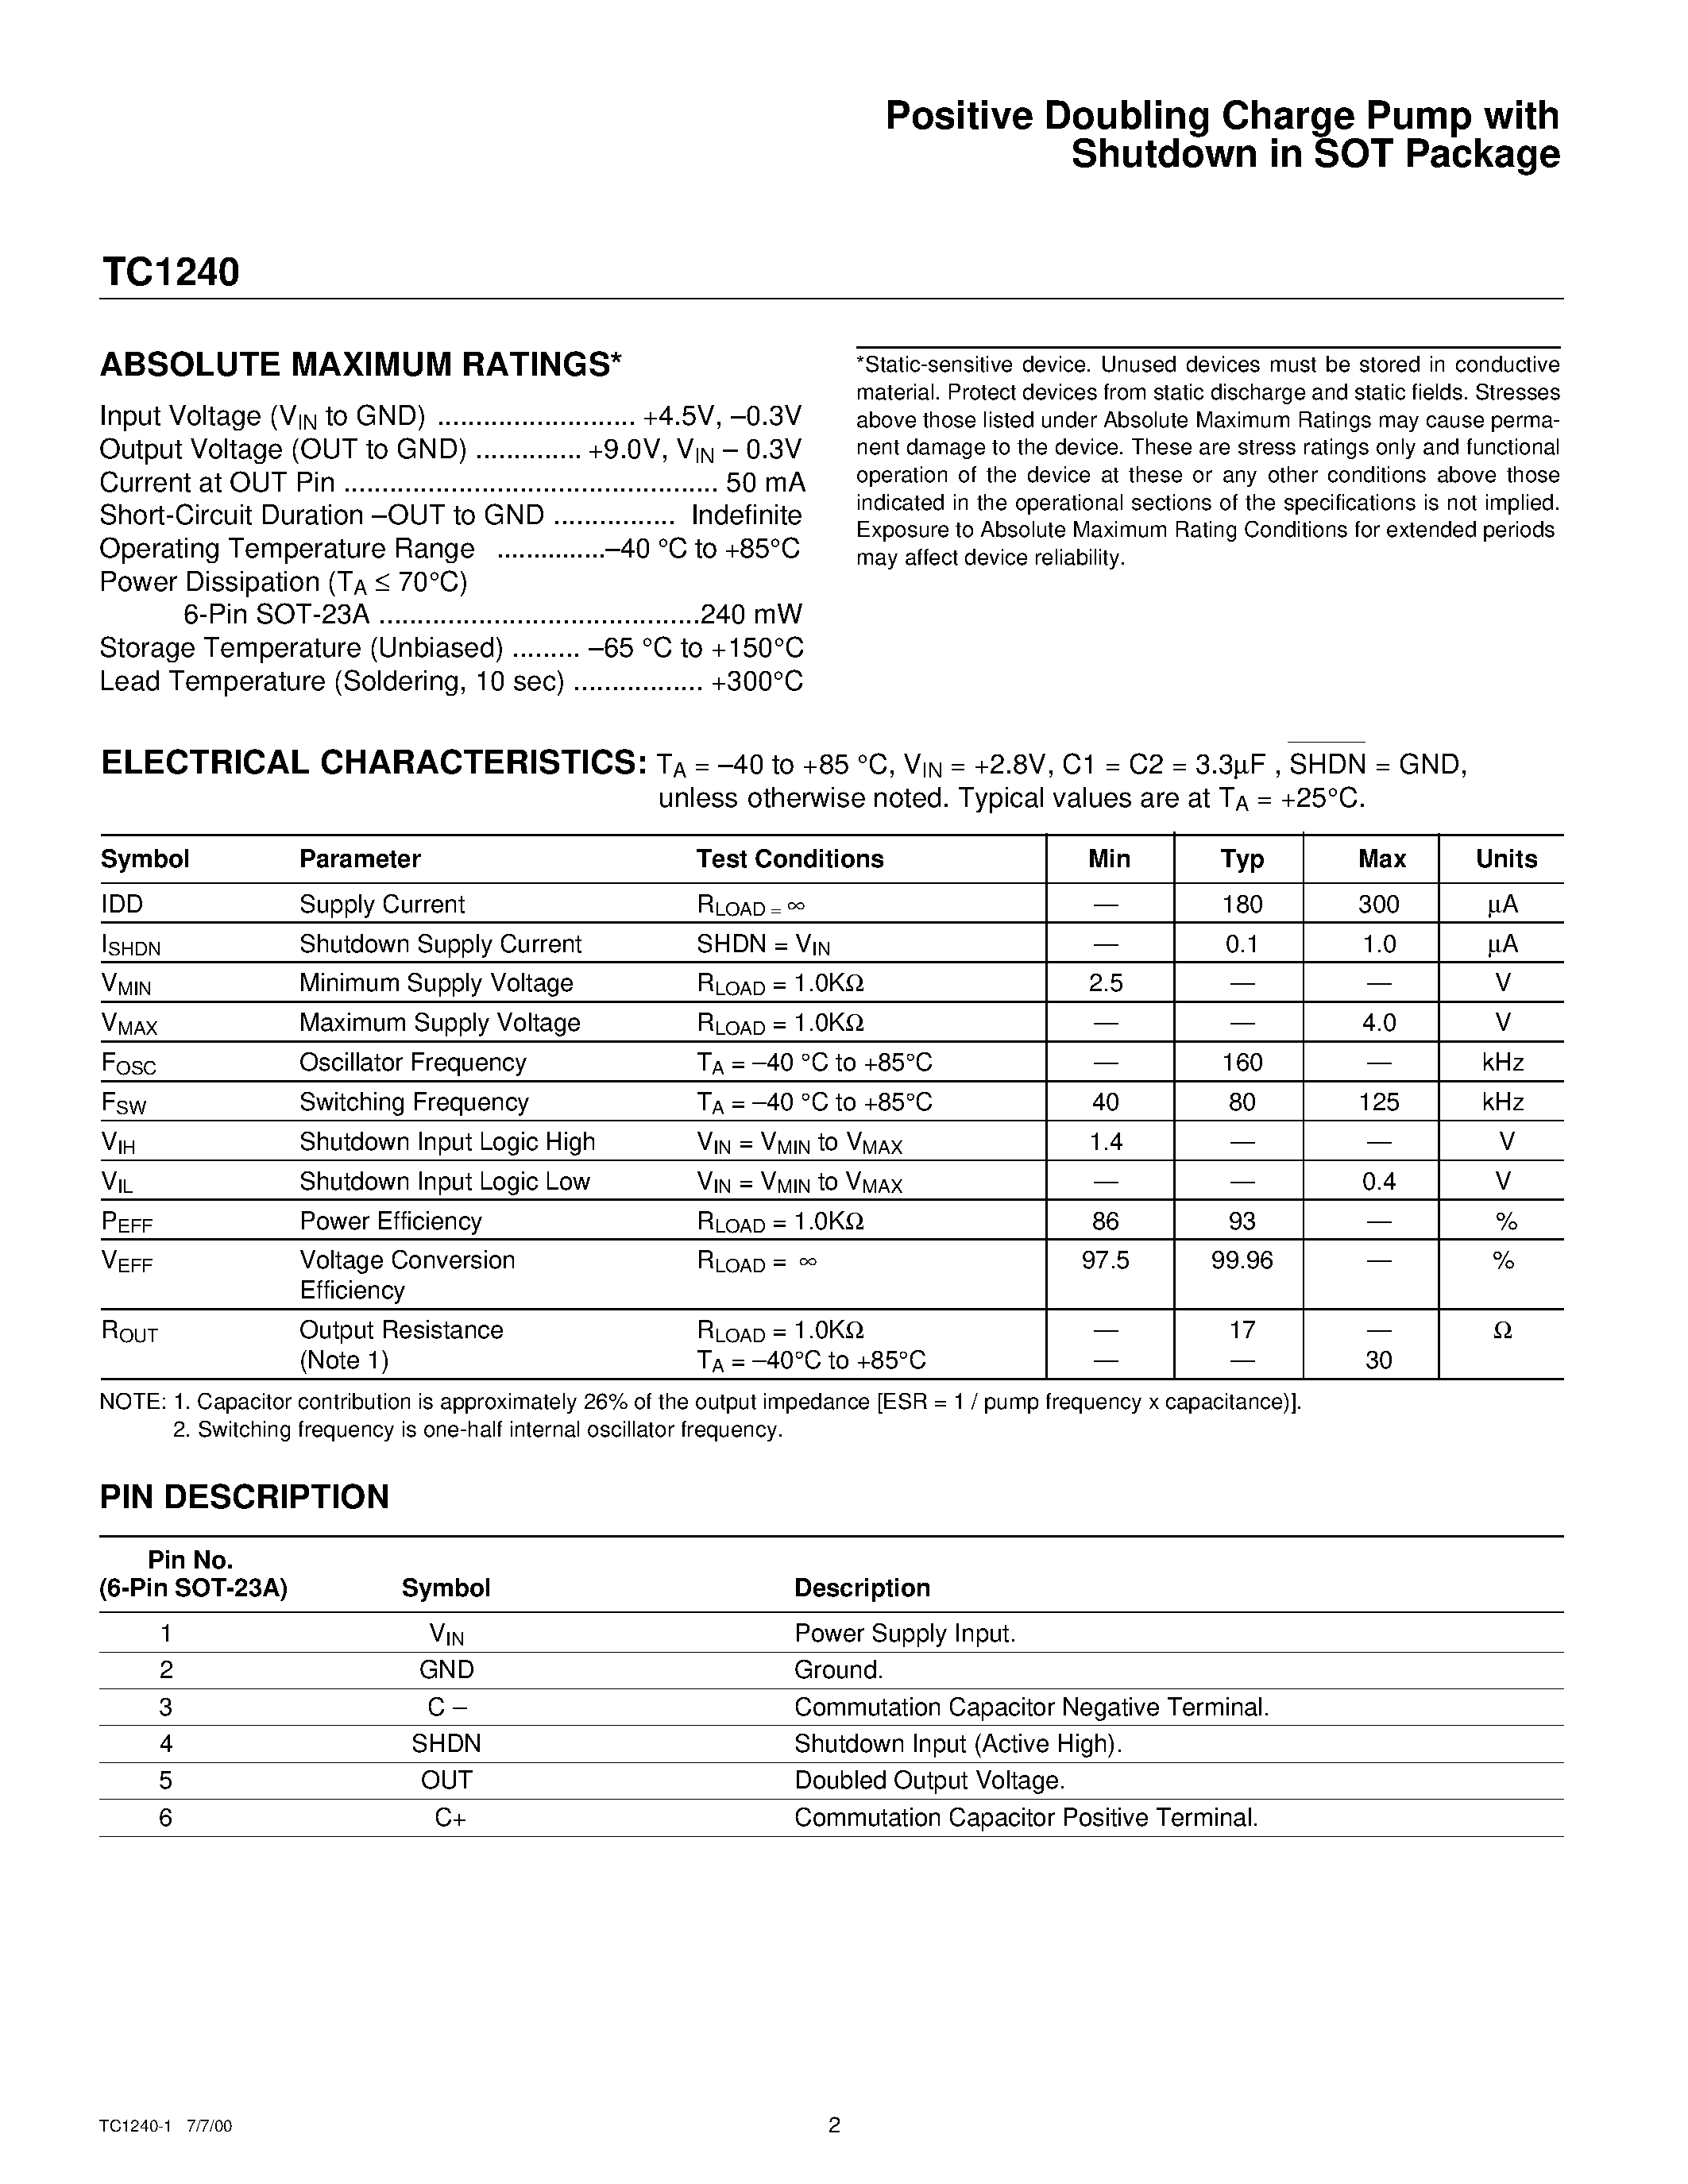 Datasheet TC1240 - Positive Doubling Charge Pump page 2